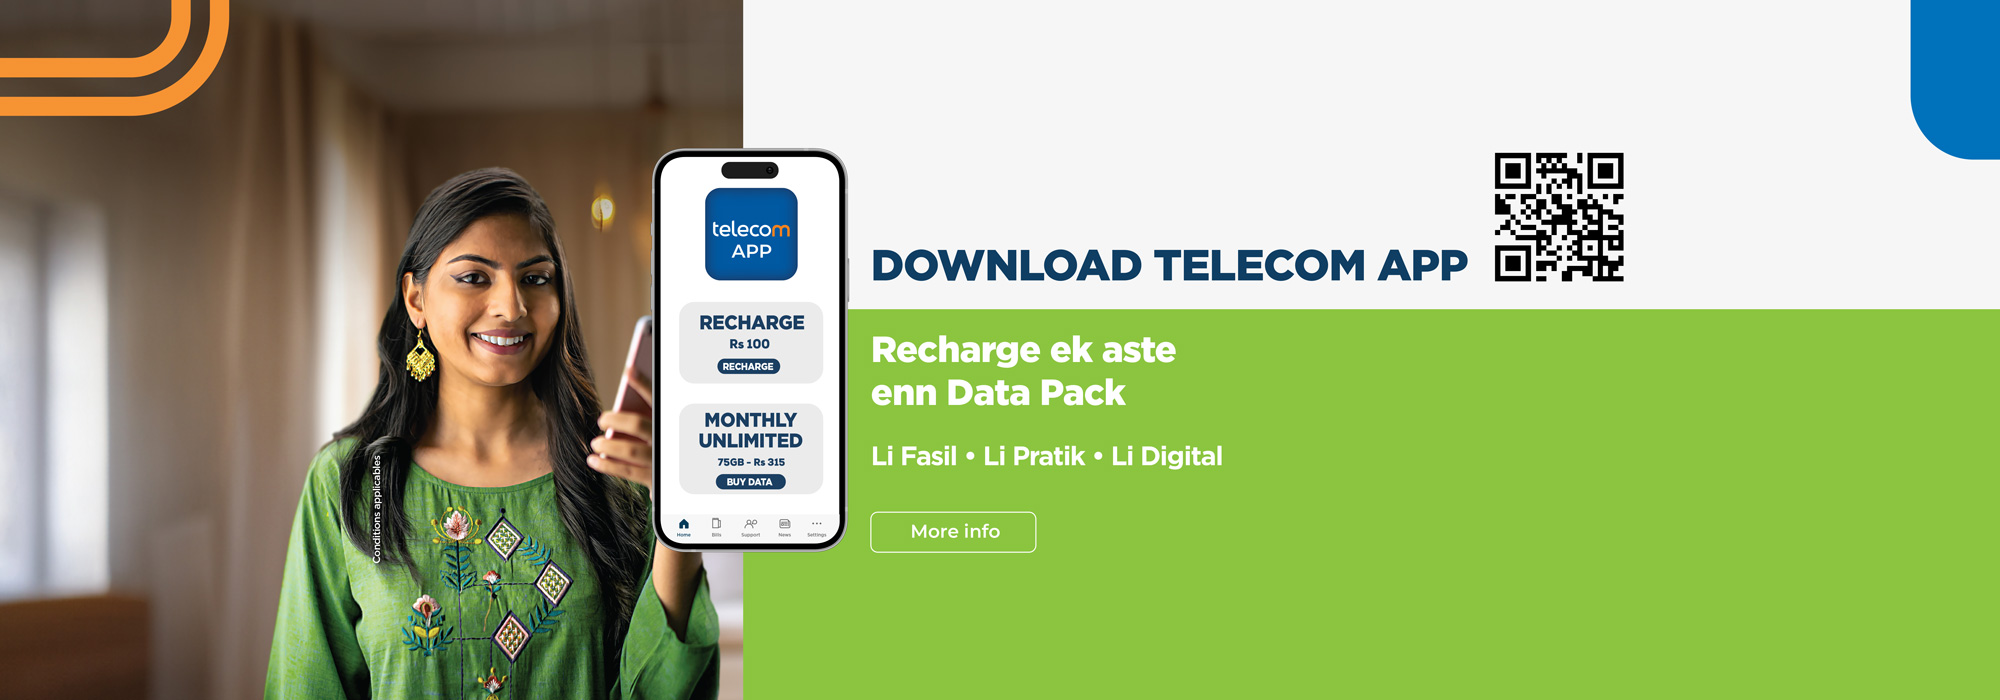 myt.mu - telecom app - recharge and buy Data Pack